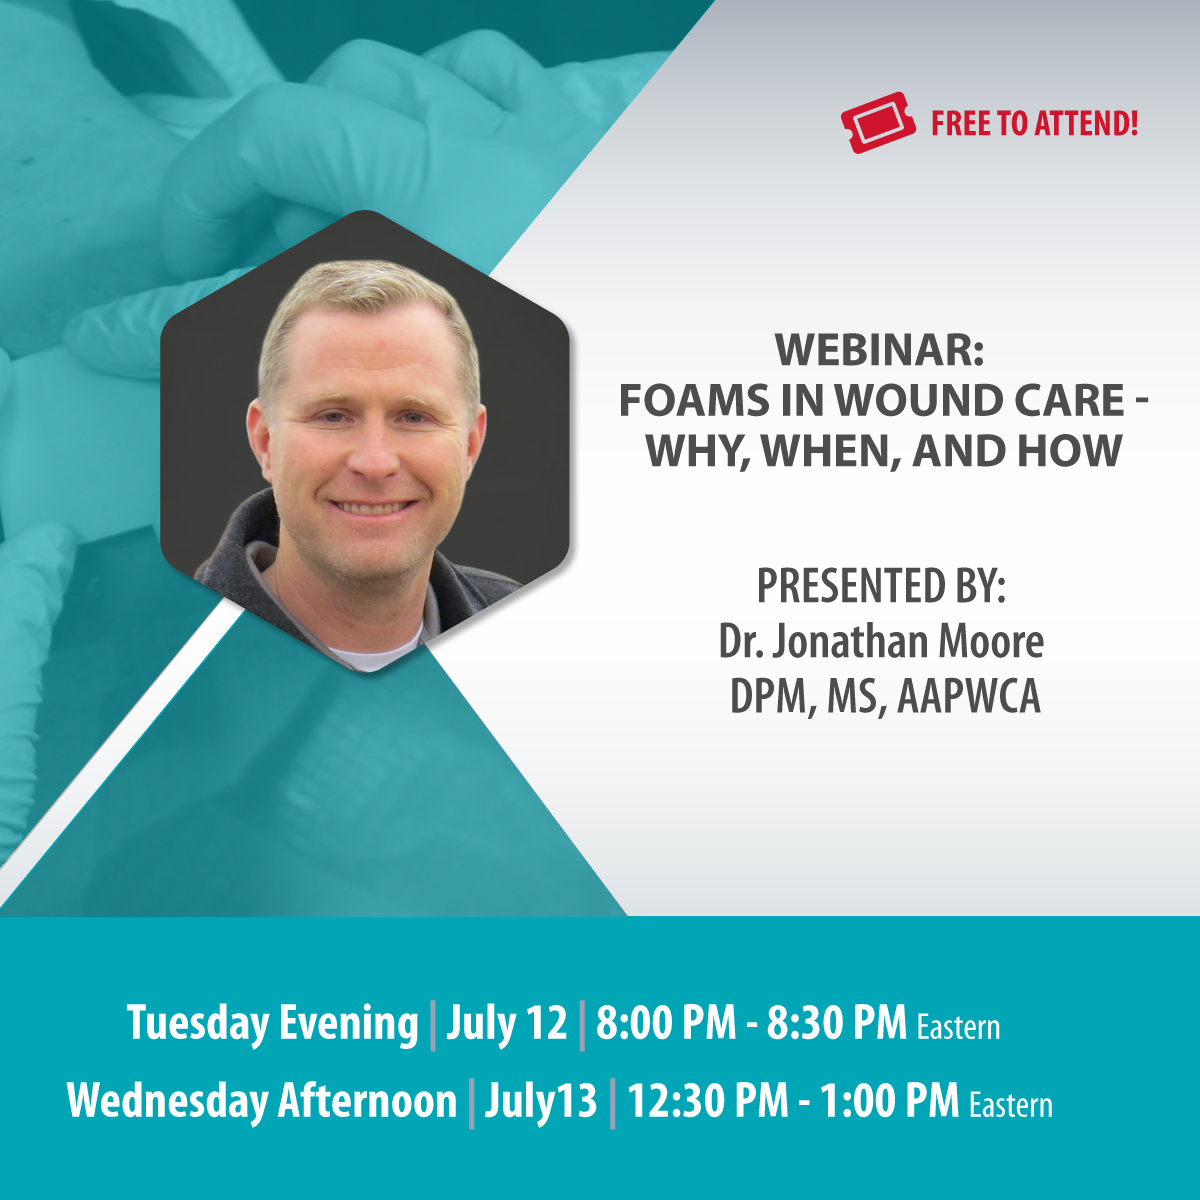 Webinar: Foams In Wound Care-Why, When, and How